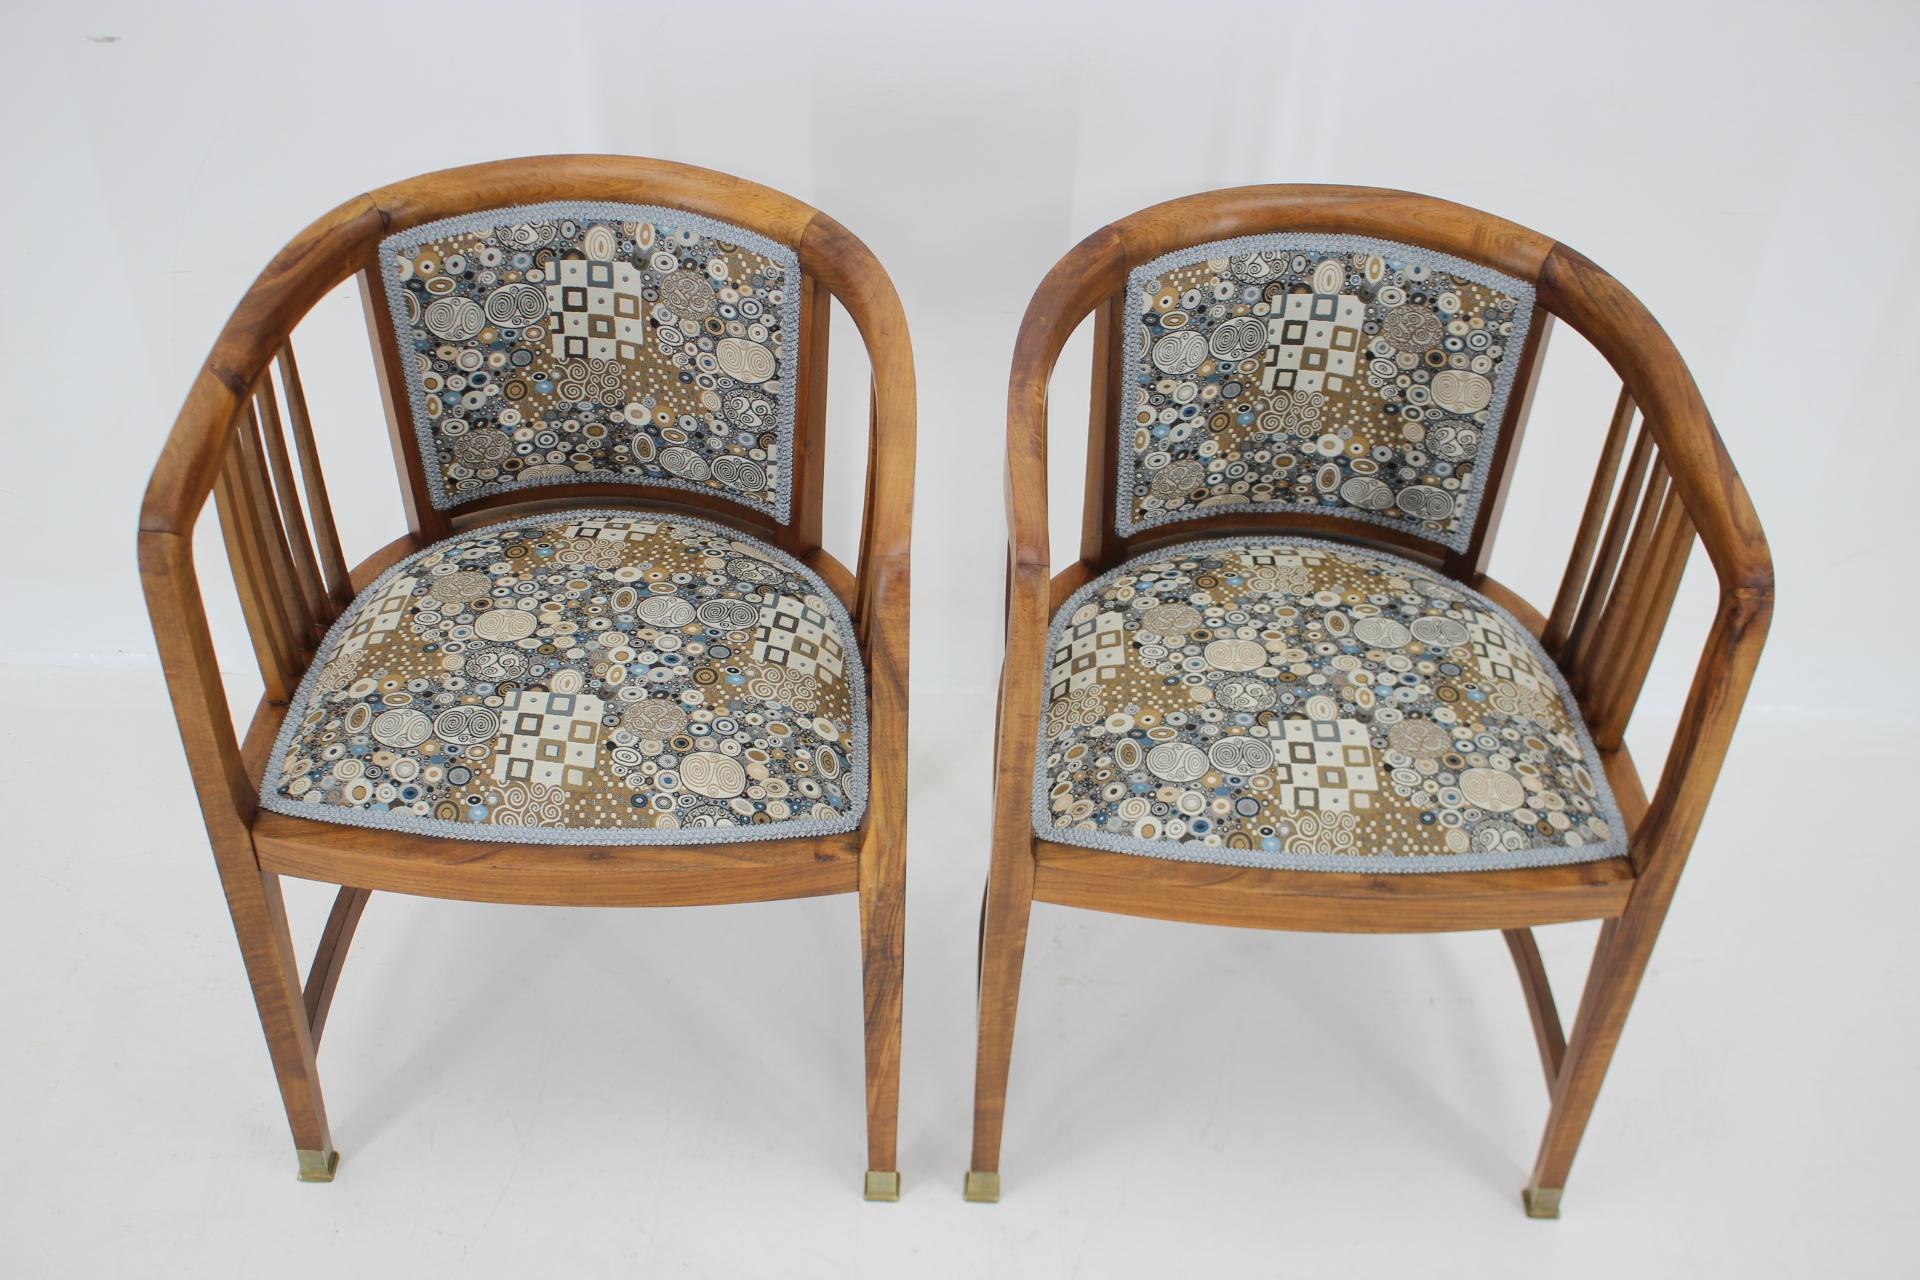 Vienna Secession Carefully Refurbished, Professionally Reupholstered in Quality Fabric Desig For Sale